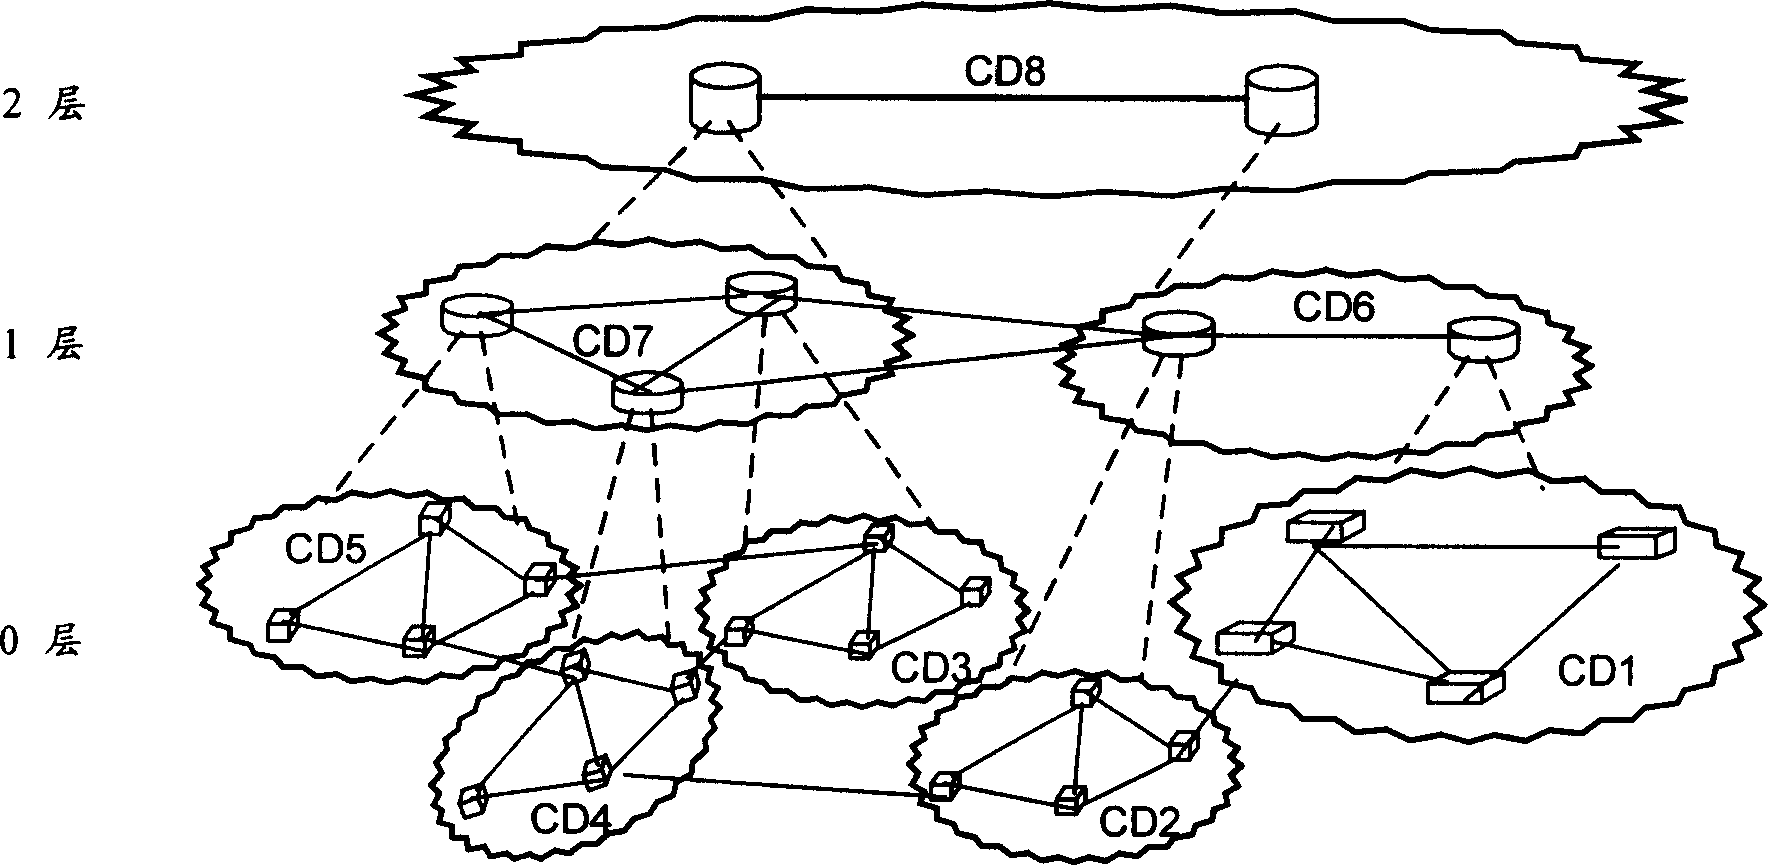 Method for confirming mapping relation between cross-domain service domain interior domains